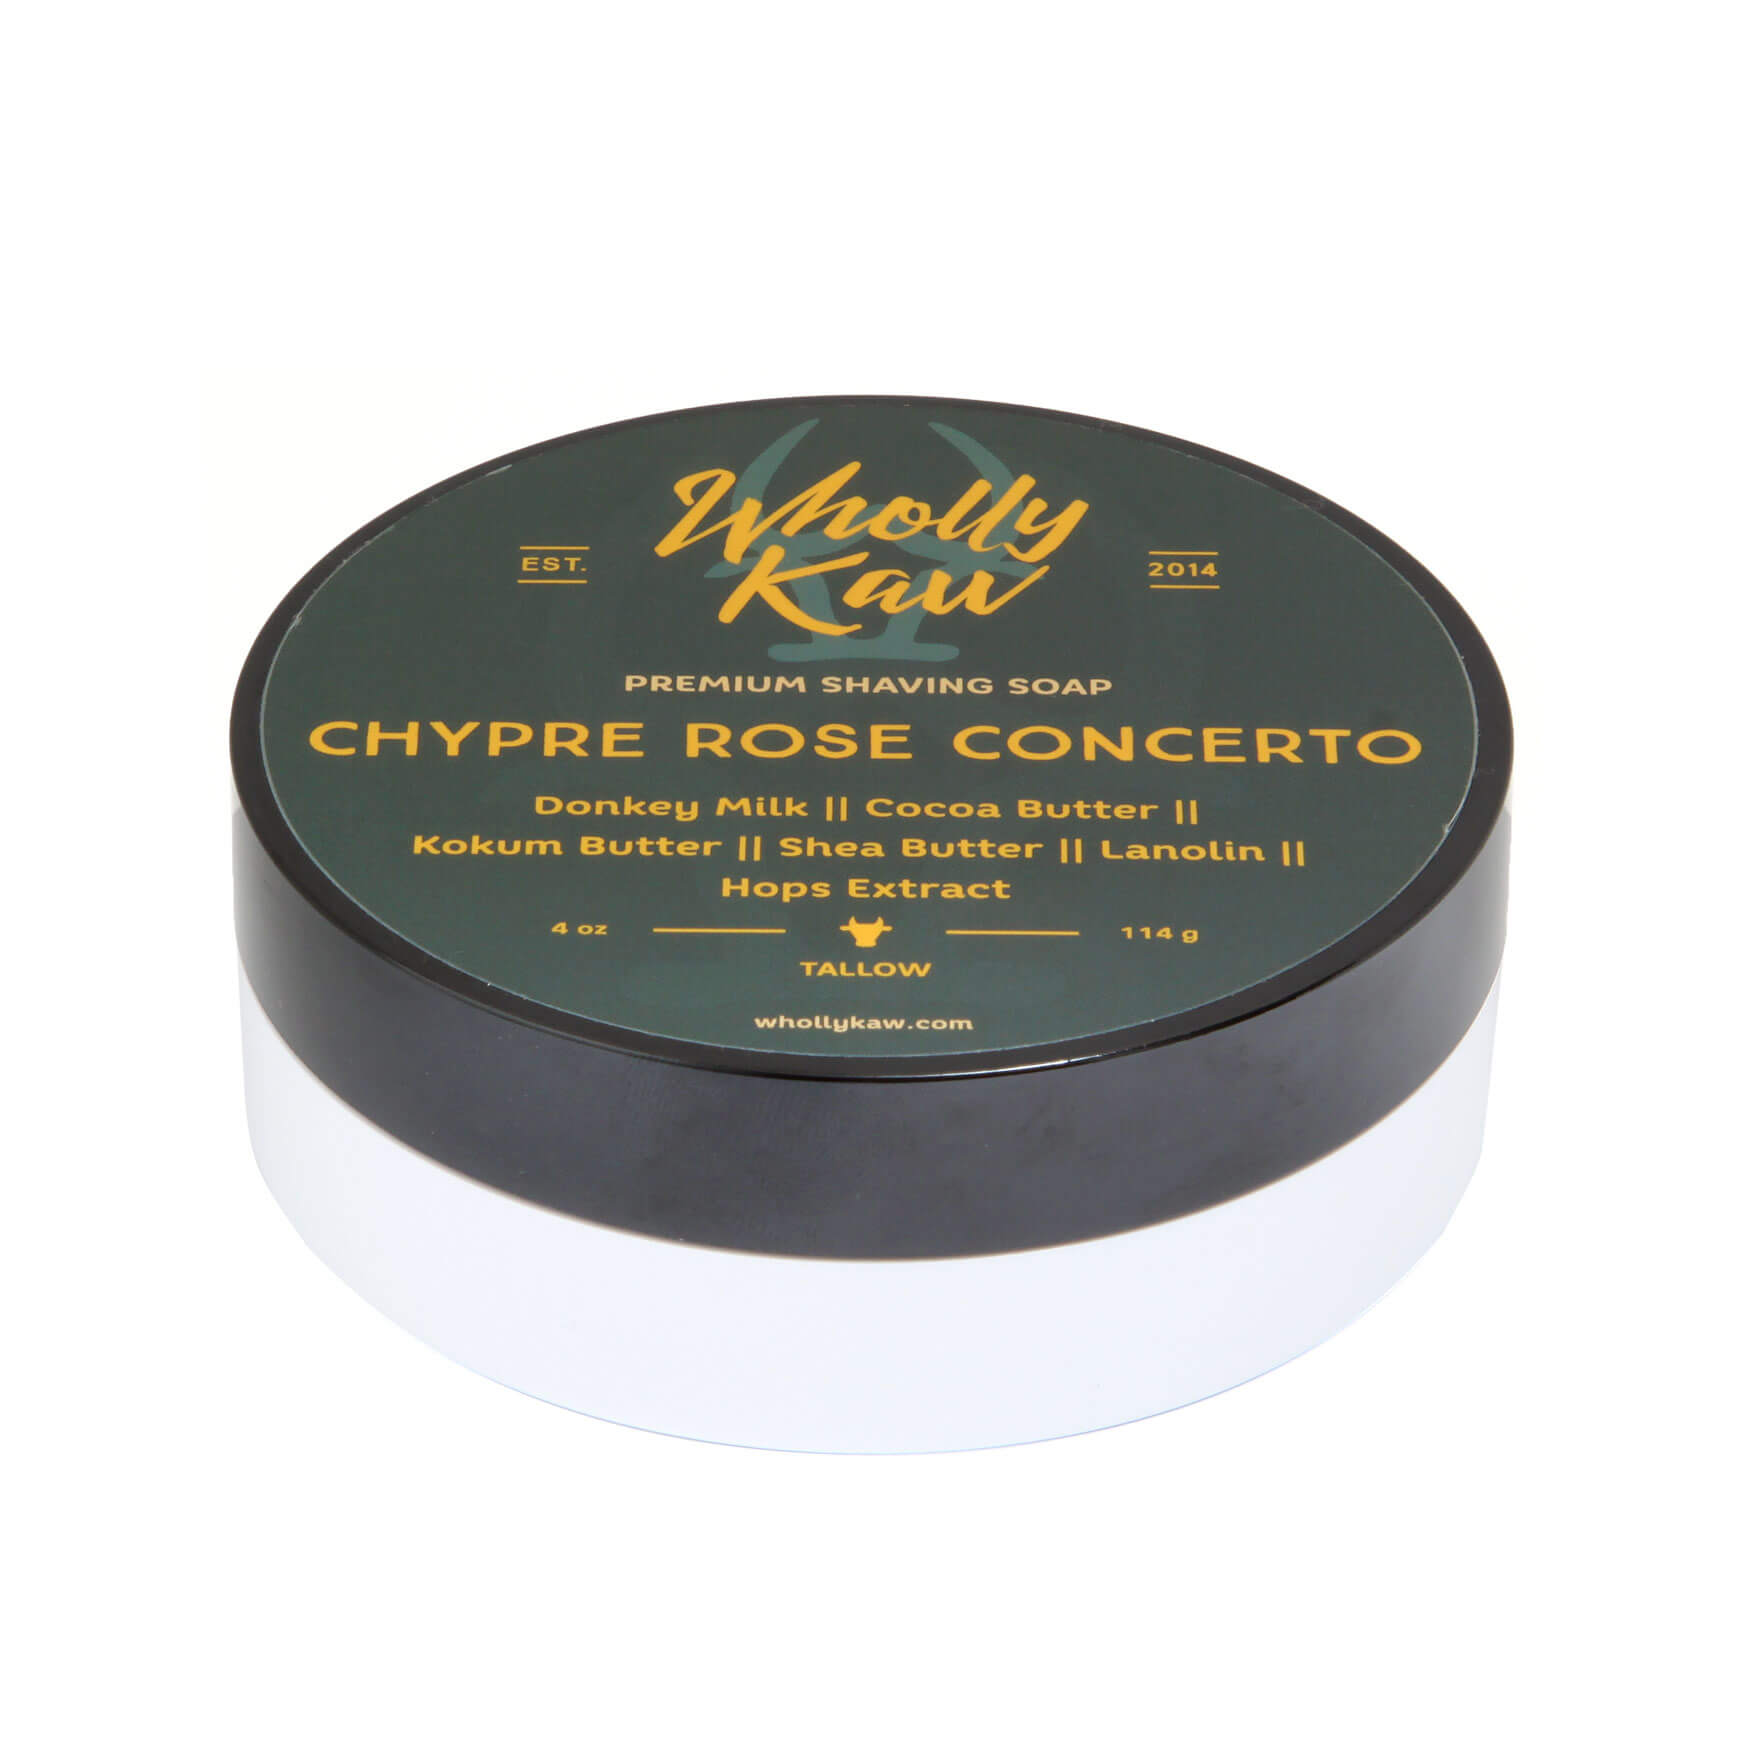 Wholly Kaw Chypre Rose Concerto Shaving Soap